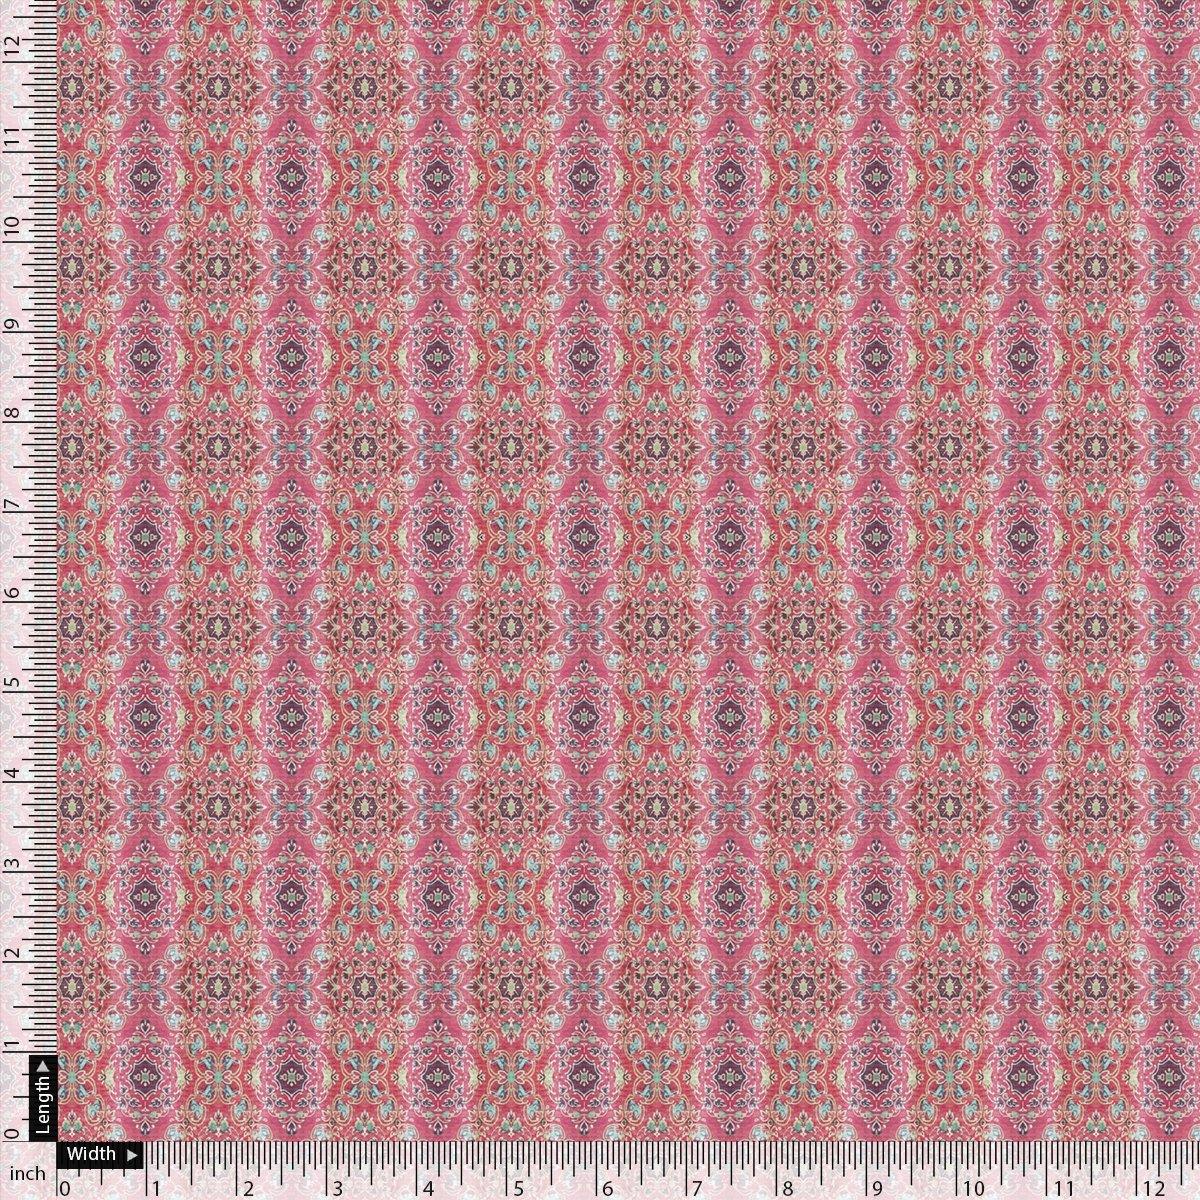 Classical Damask With Charm Colour Digital Printed Fabric - Rayon - FAB VOGUE Studio®